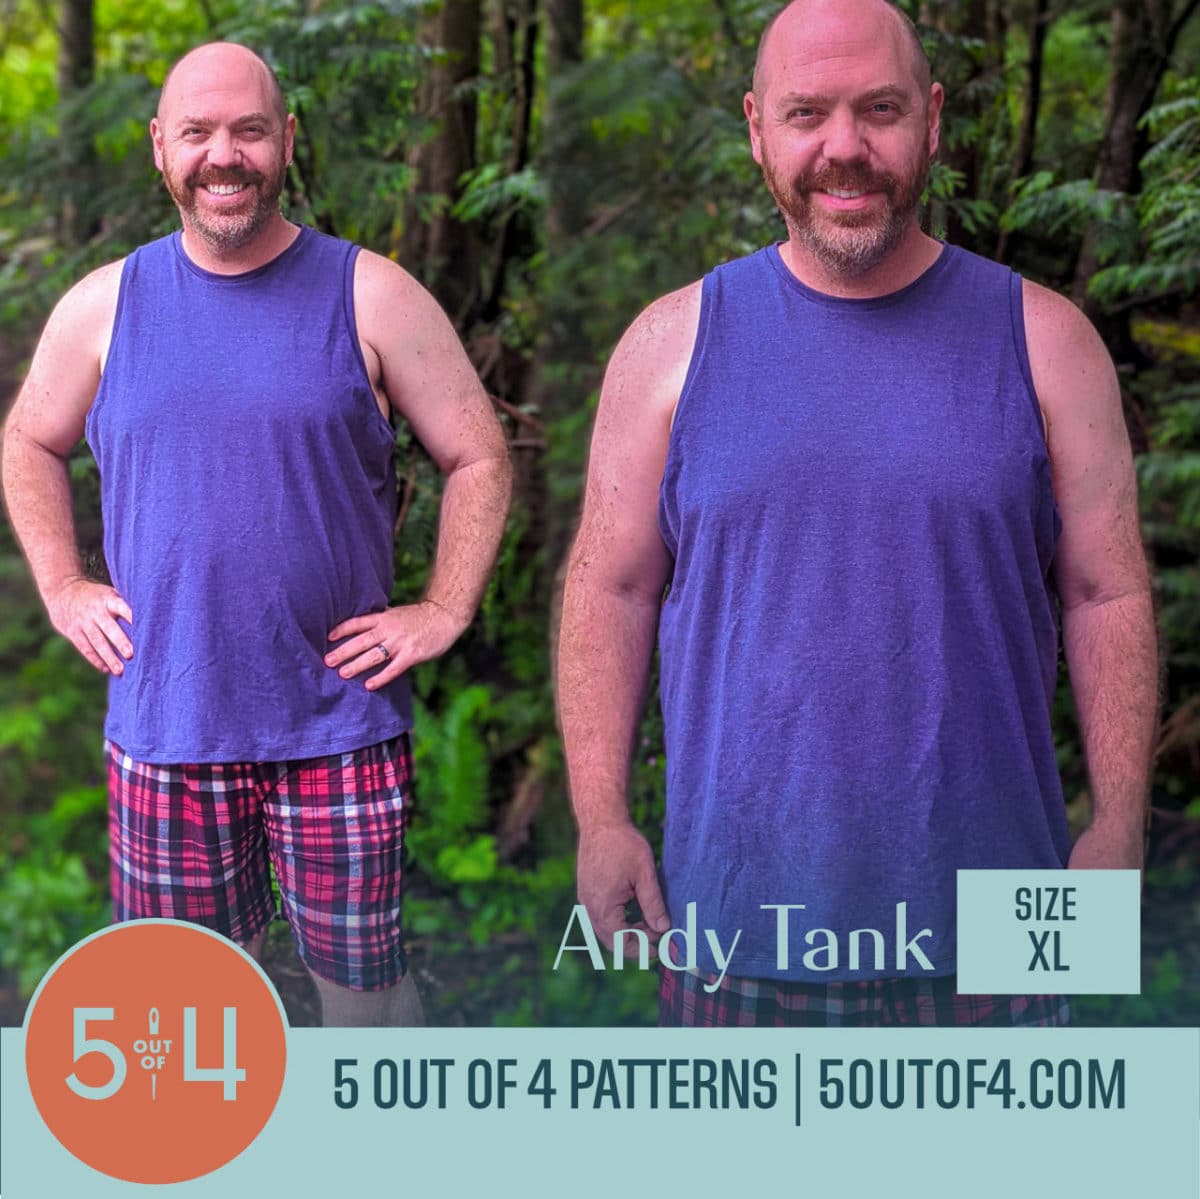 Andy Tank - 5 out of 4 Patterns